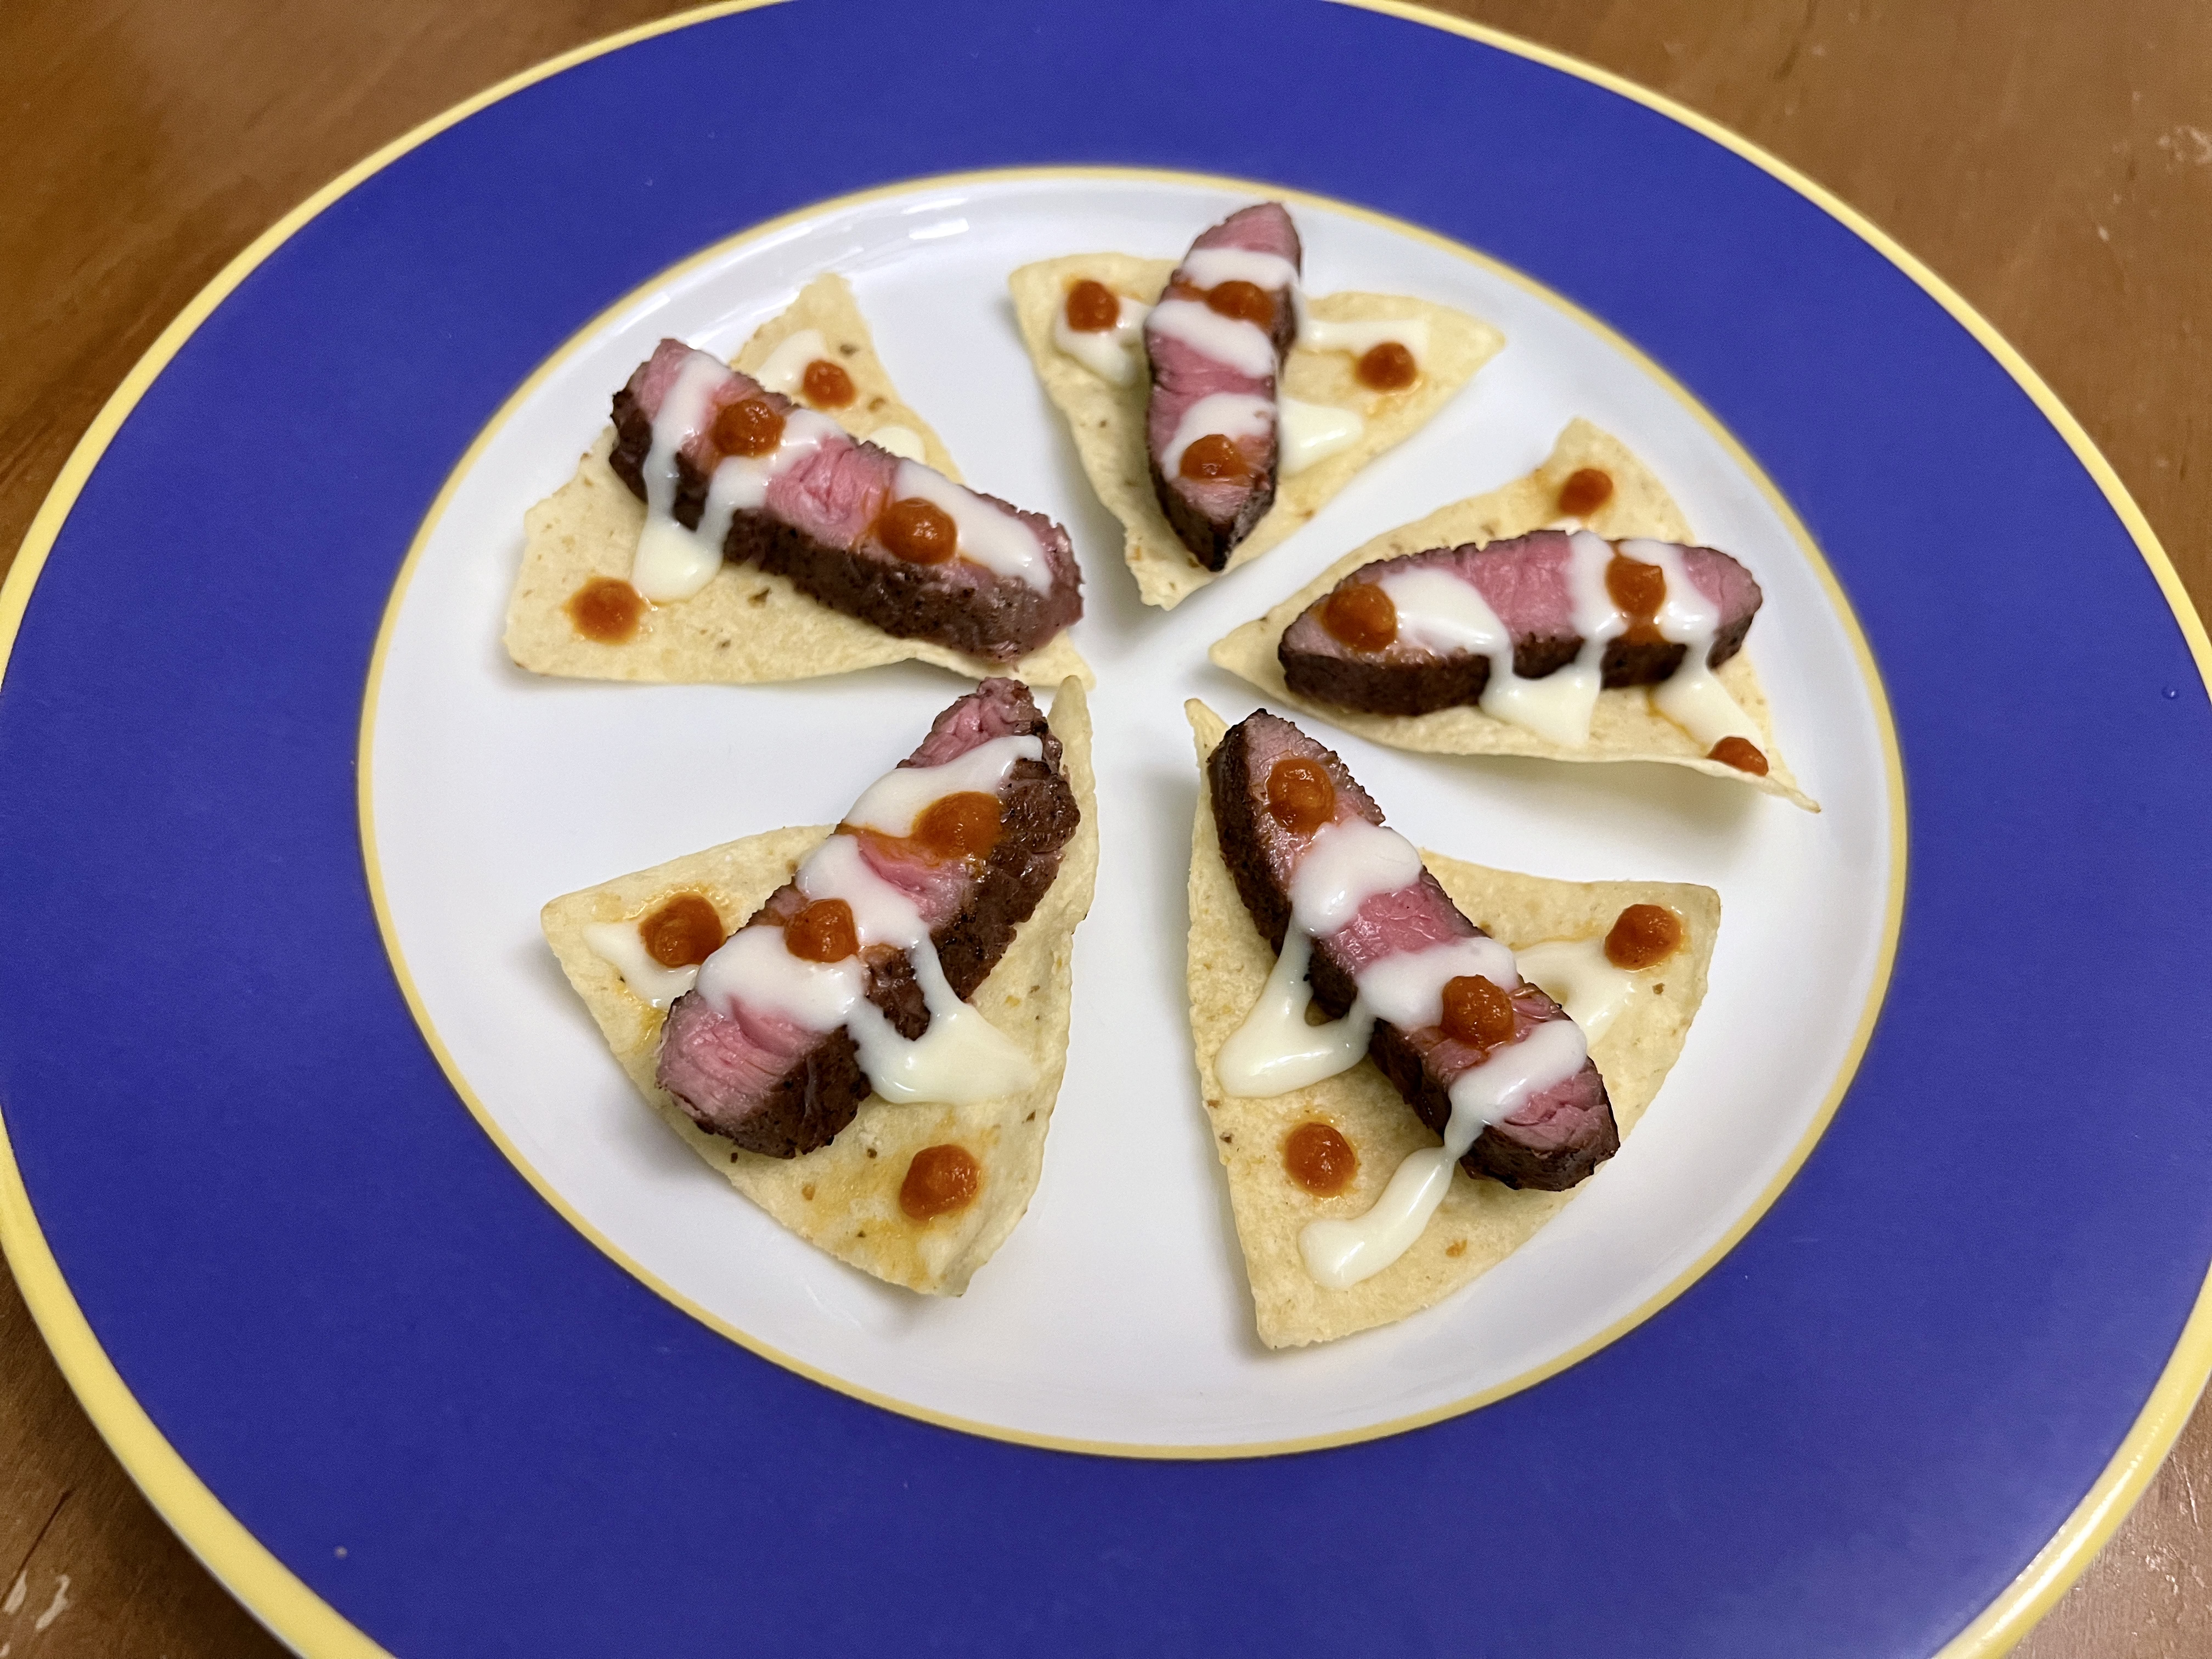 Strips of steak on tortilla chips, topped with a zigzag of white cheese and dotted with red salsa.